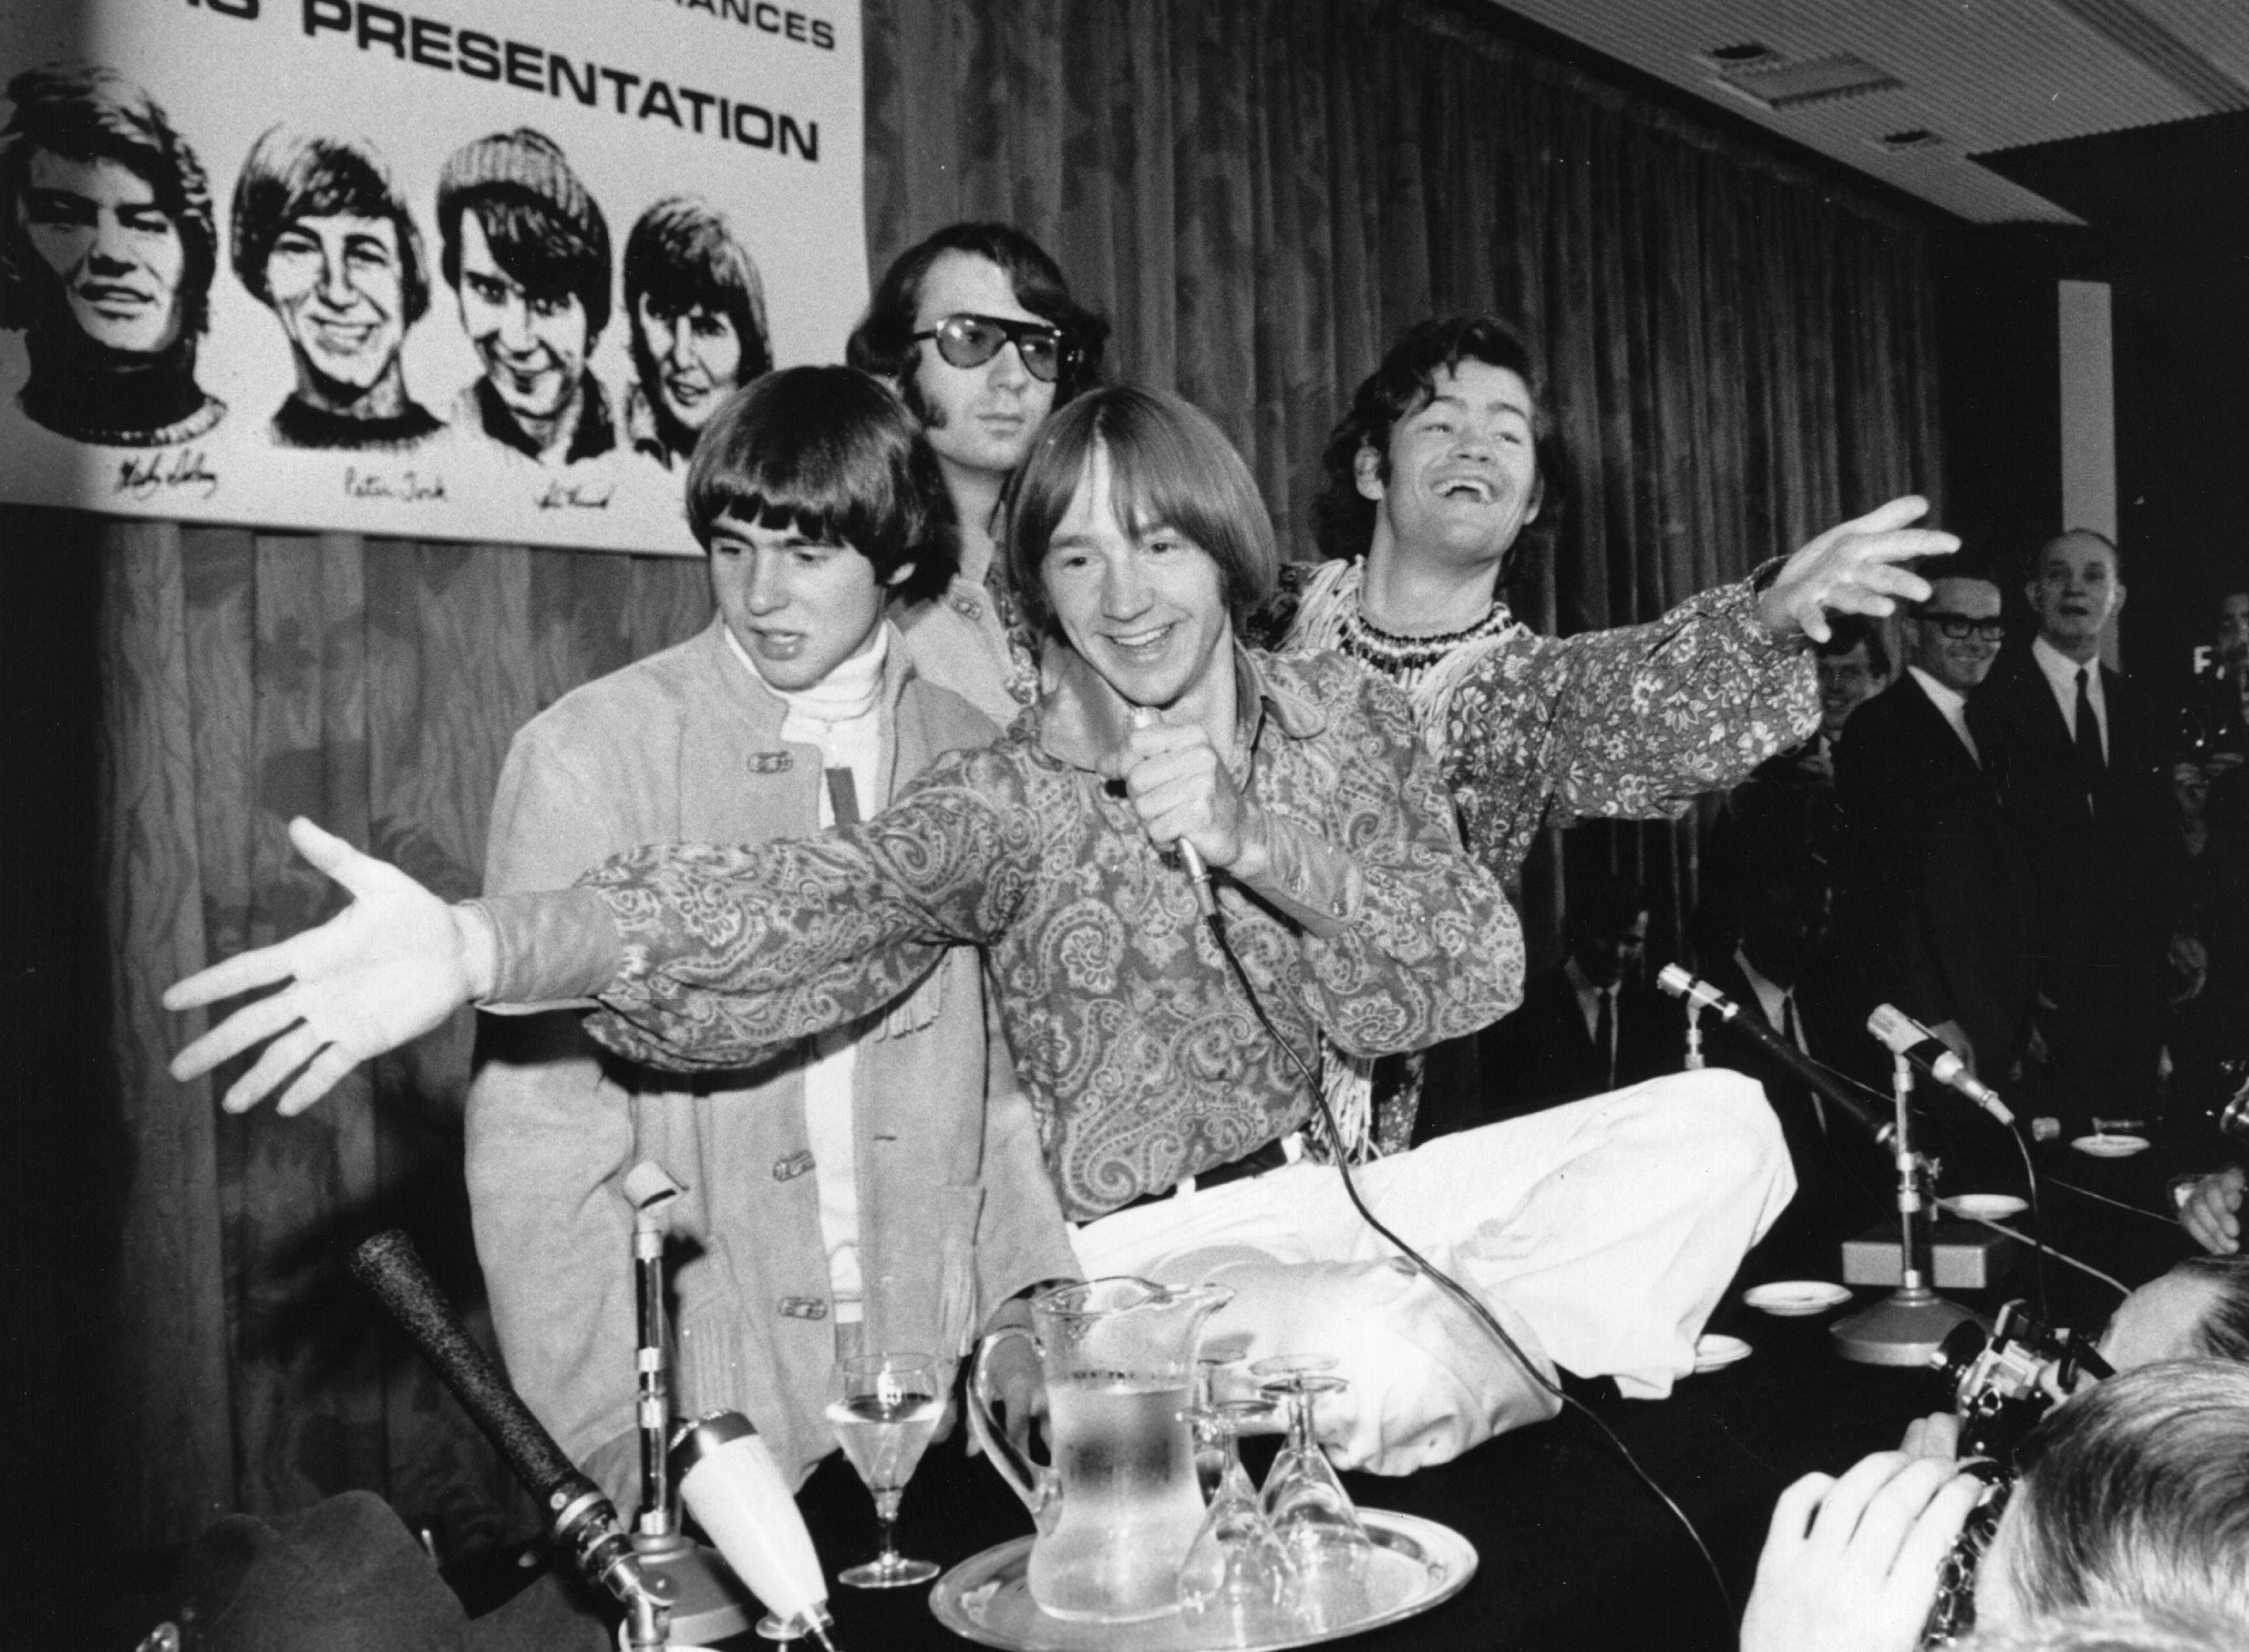 The Monkees at a table with a pitcher of water on it